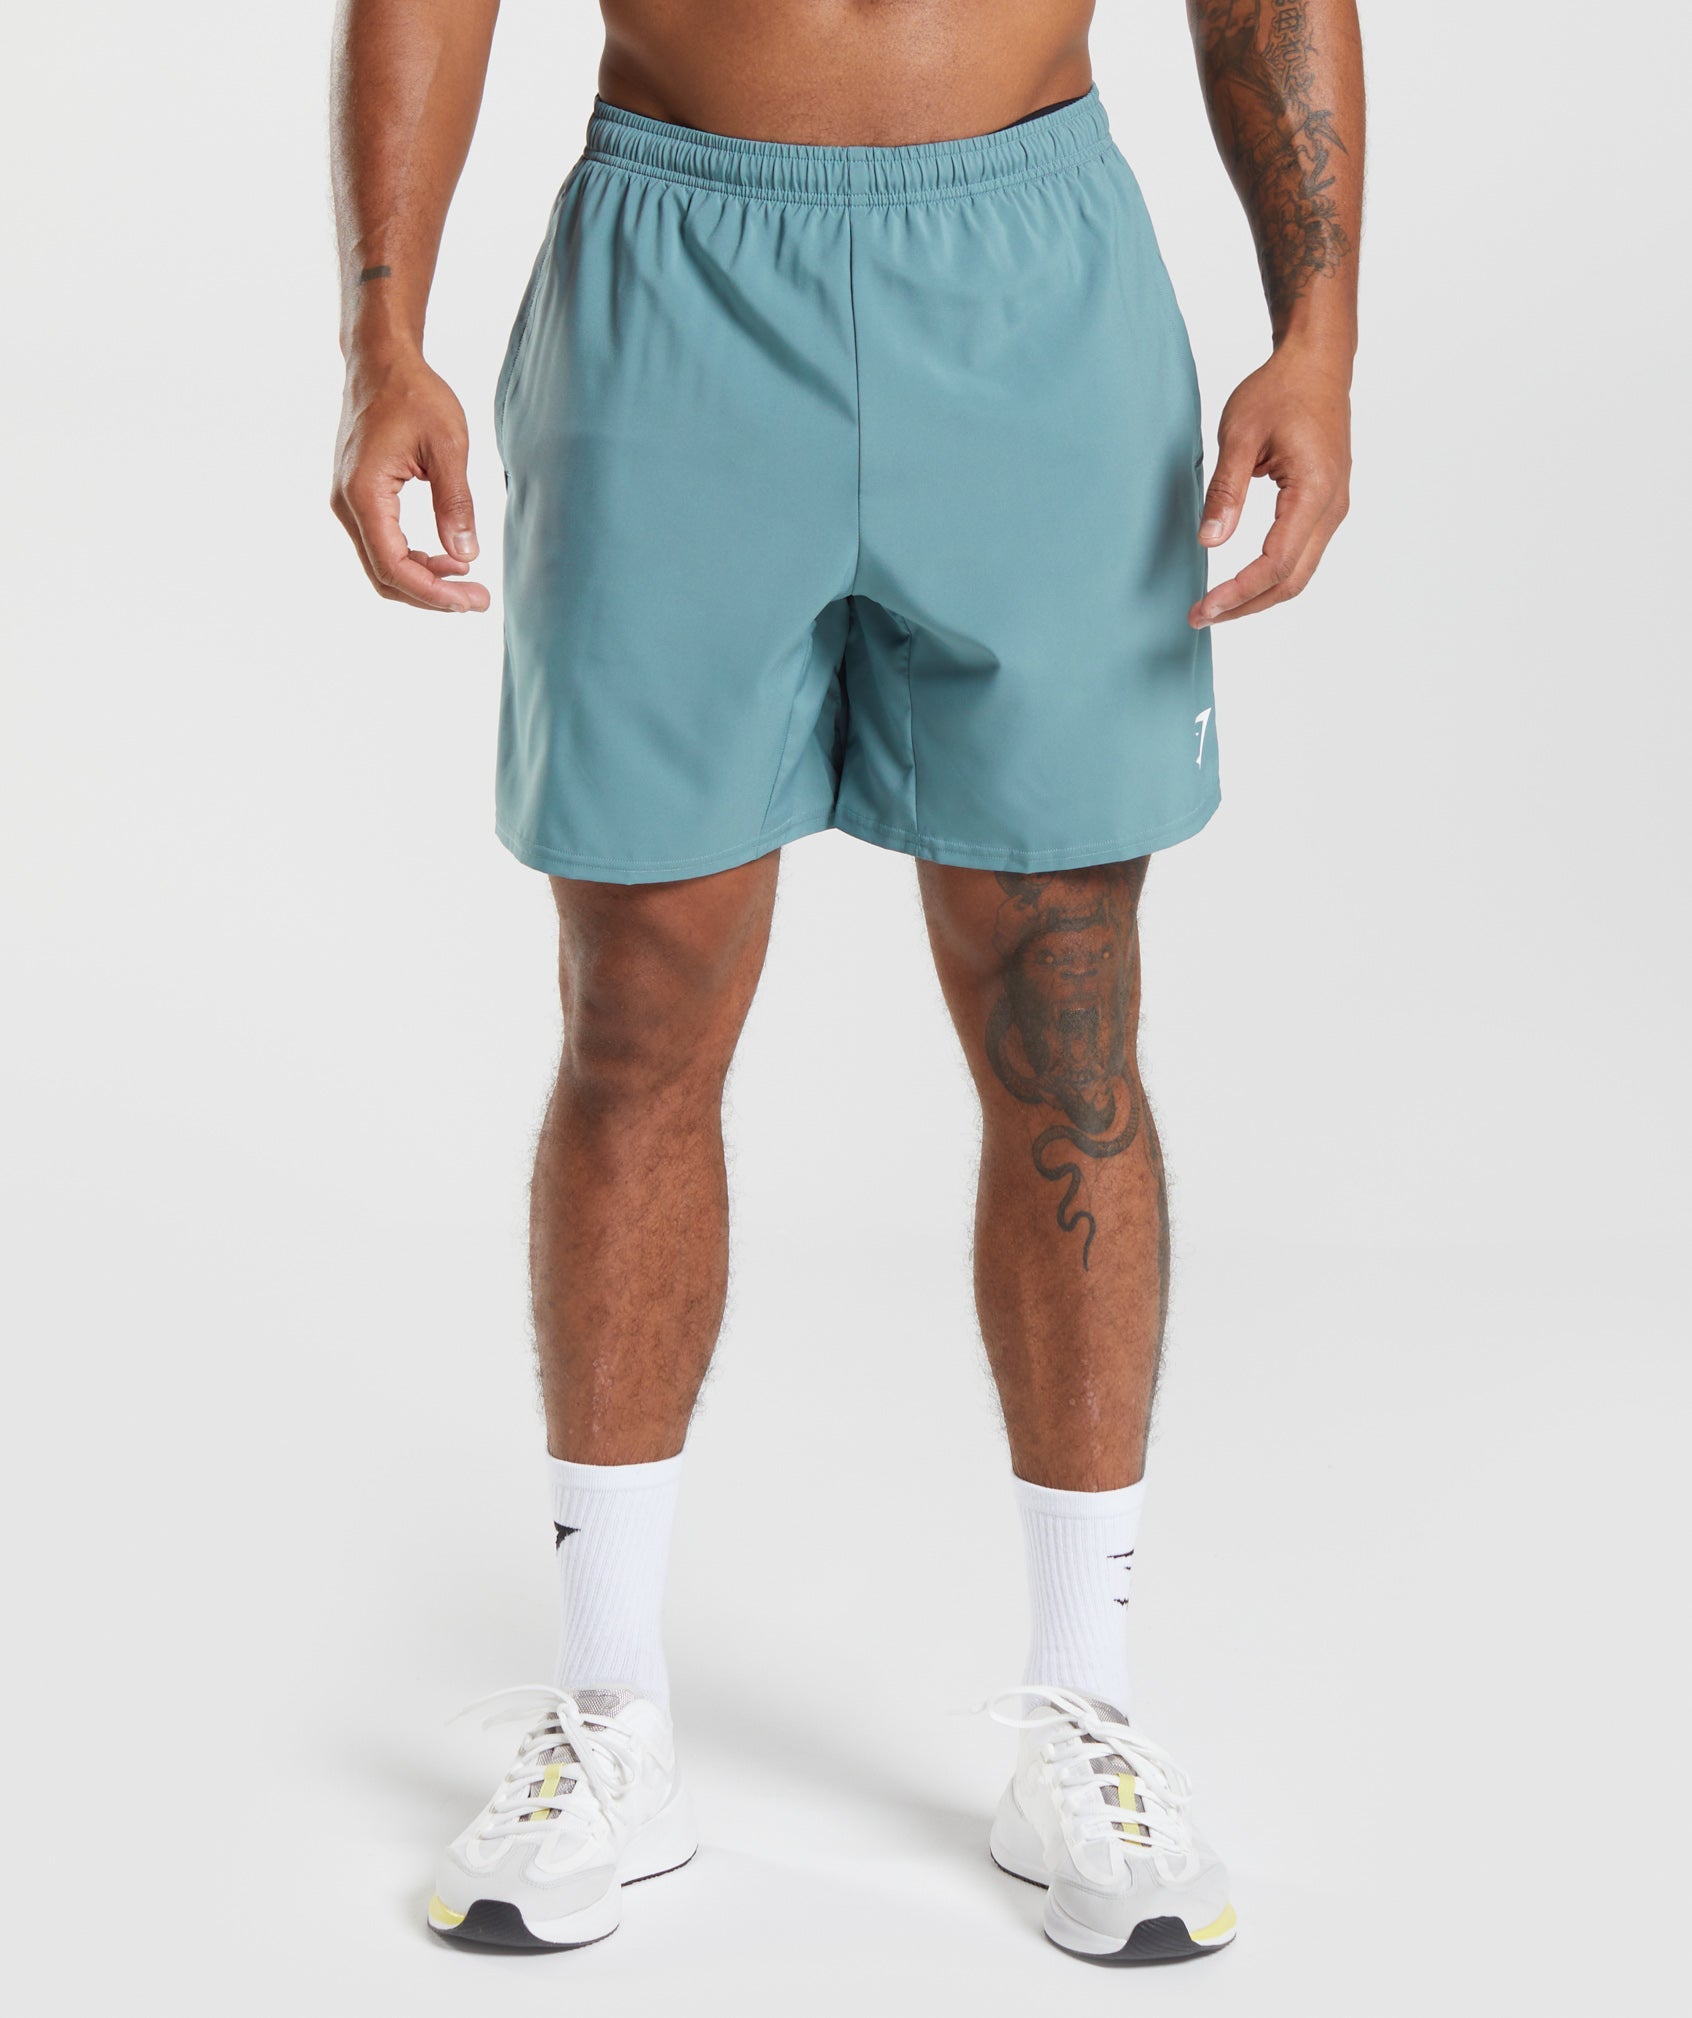 Arrival 7" Shorts in Thunder Blue - view 1